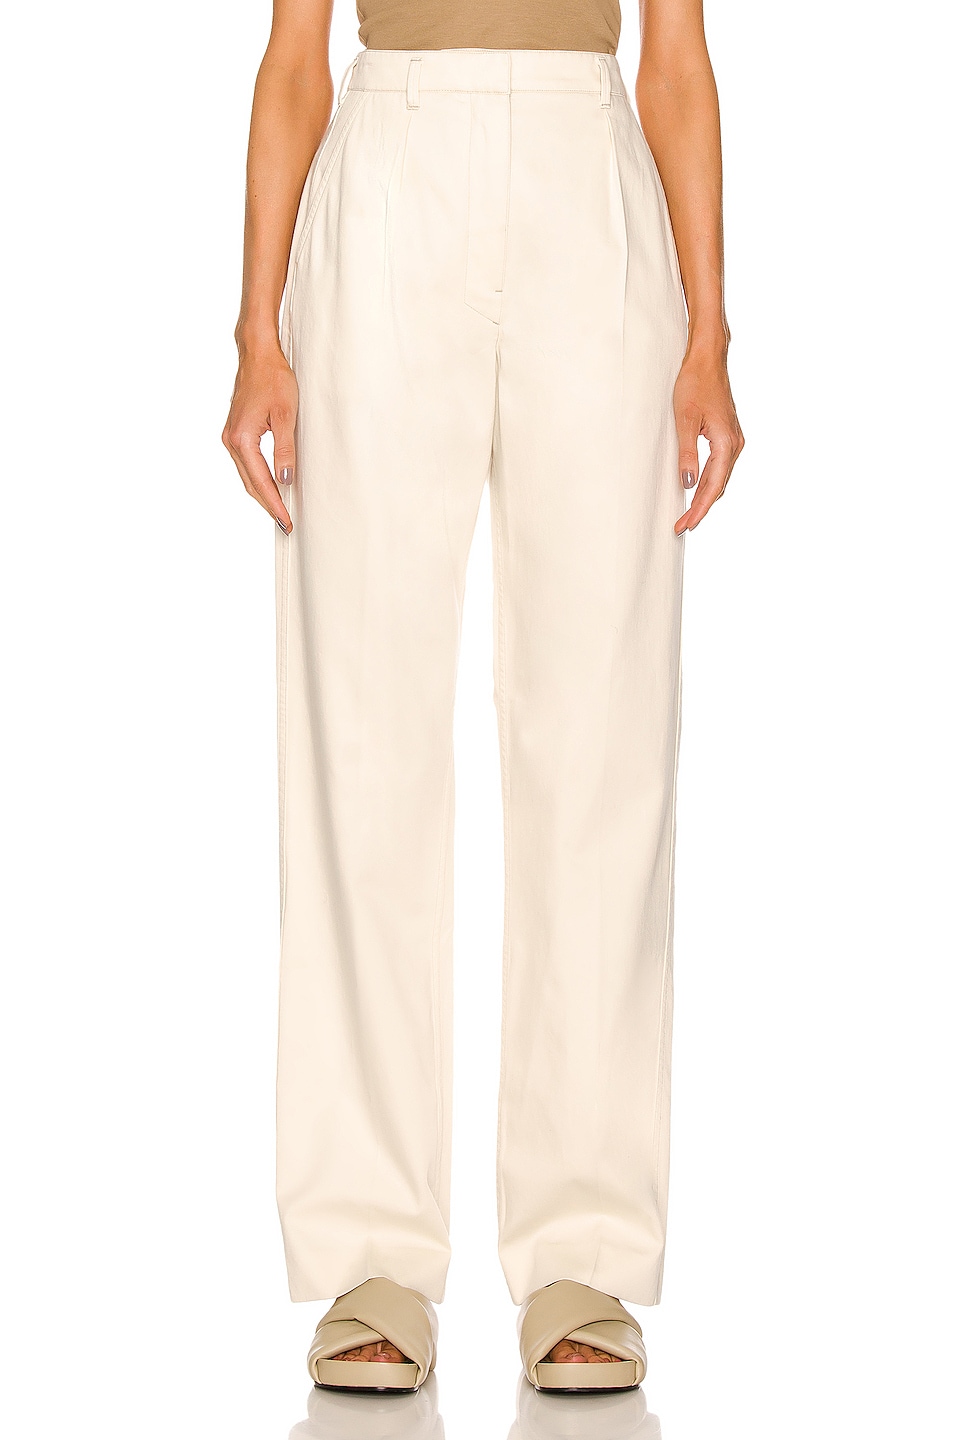 Image 1 of Lemaire Light Suit Pant in Creamy White